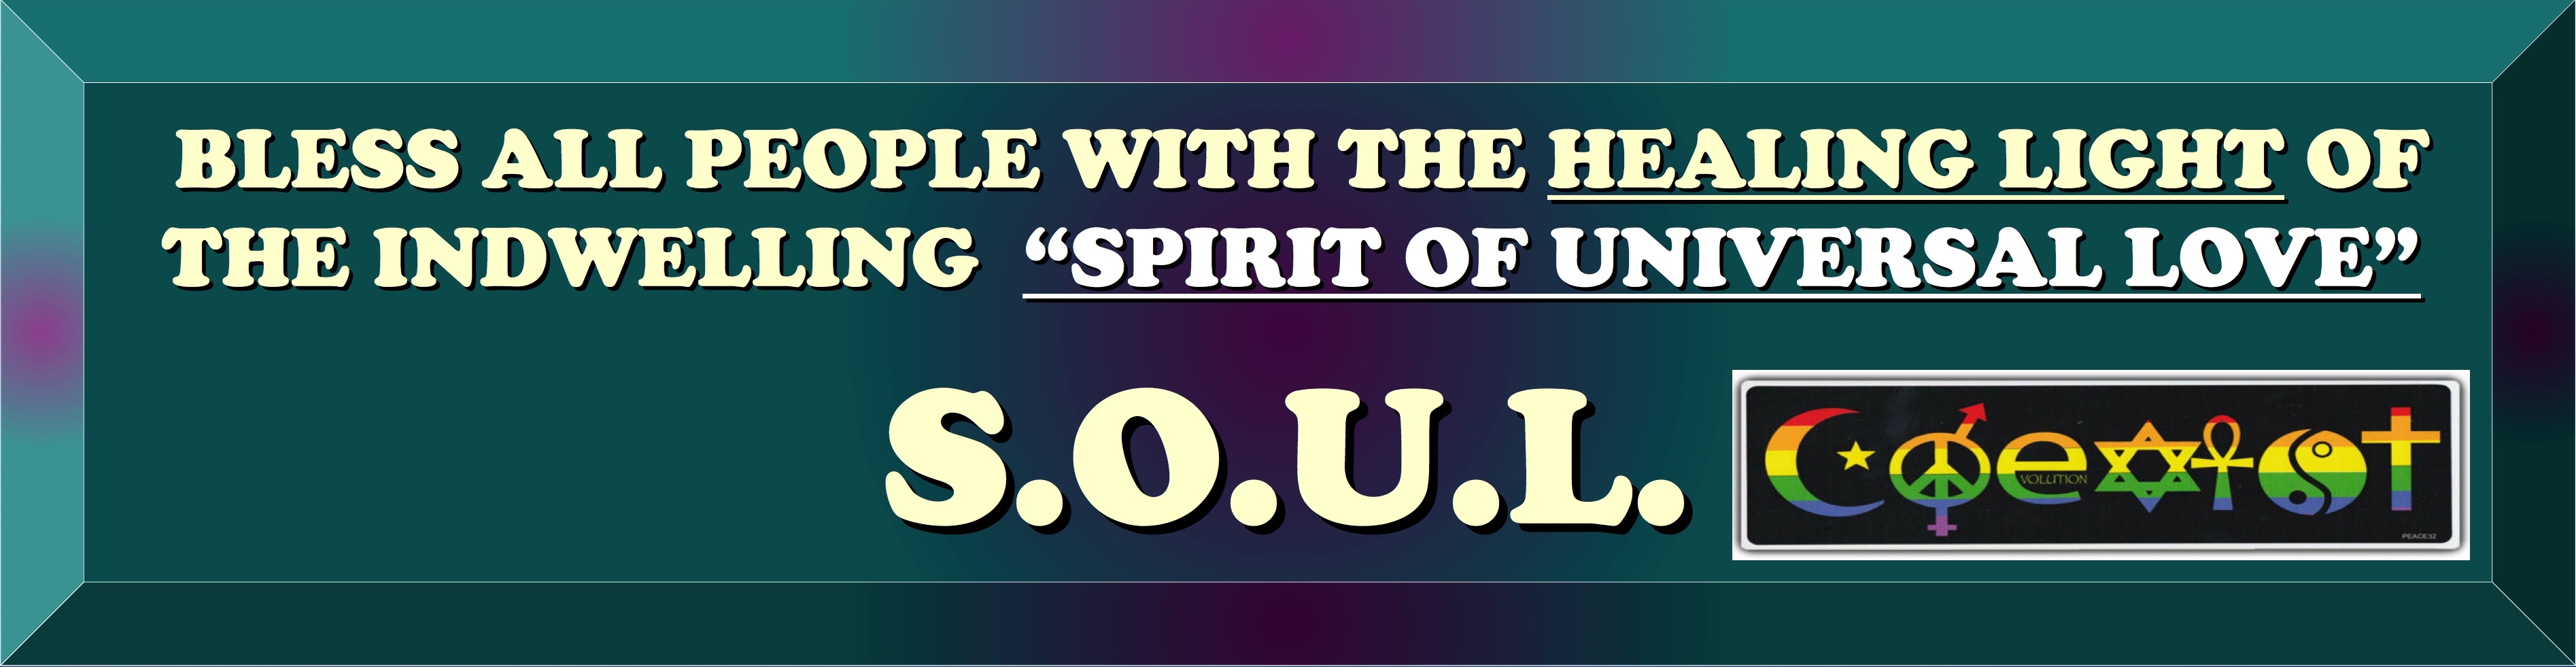 BLESS ALL PEOPLE IN THE HEALING LIGHT OF THE INDWELLING SPIRIT OF UNIVERSAL LOVE - S.O.U.L.